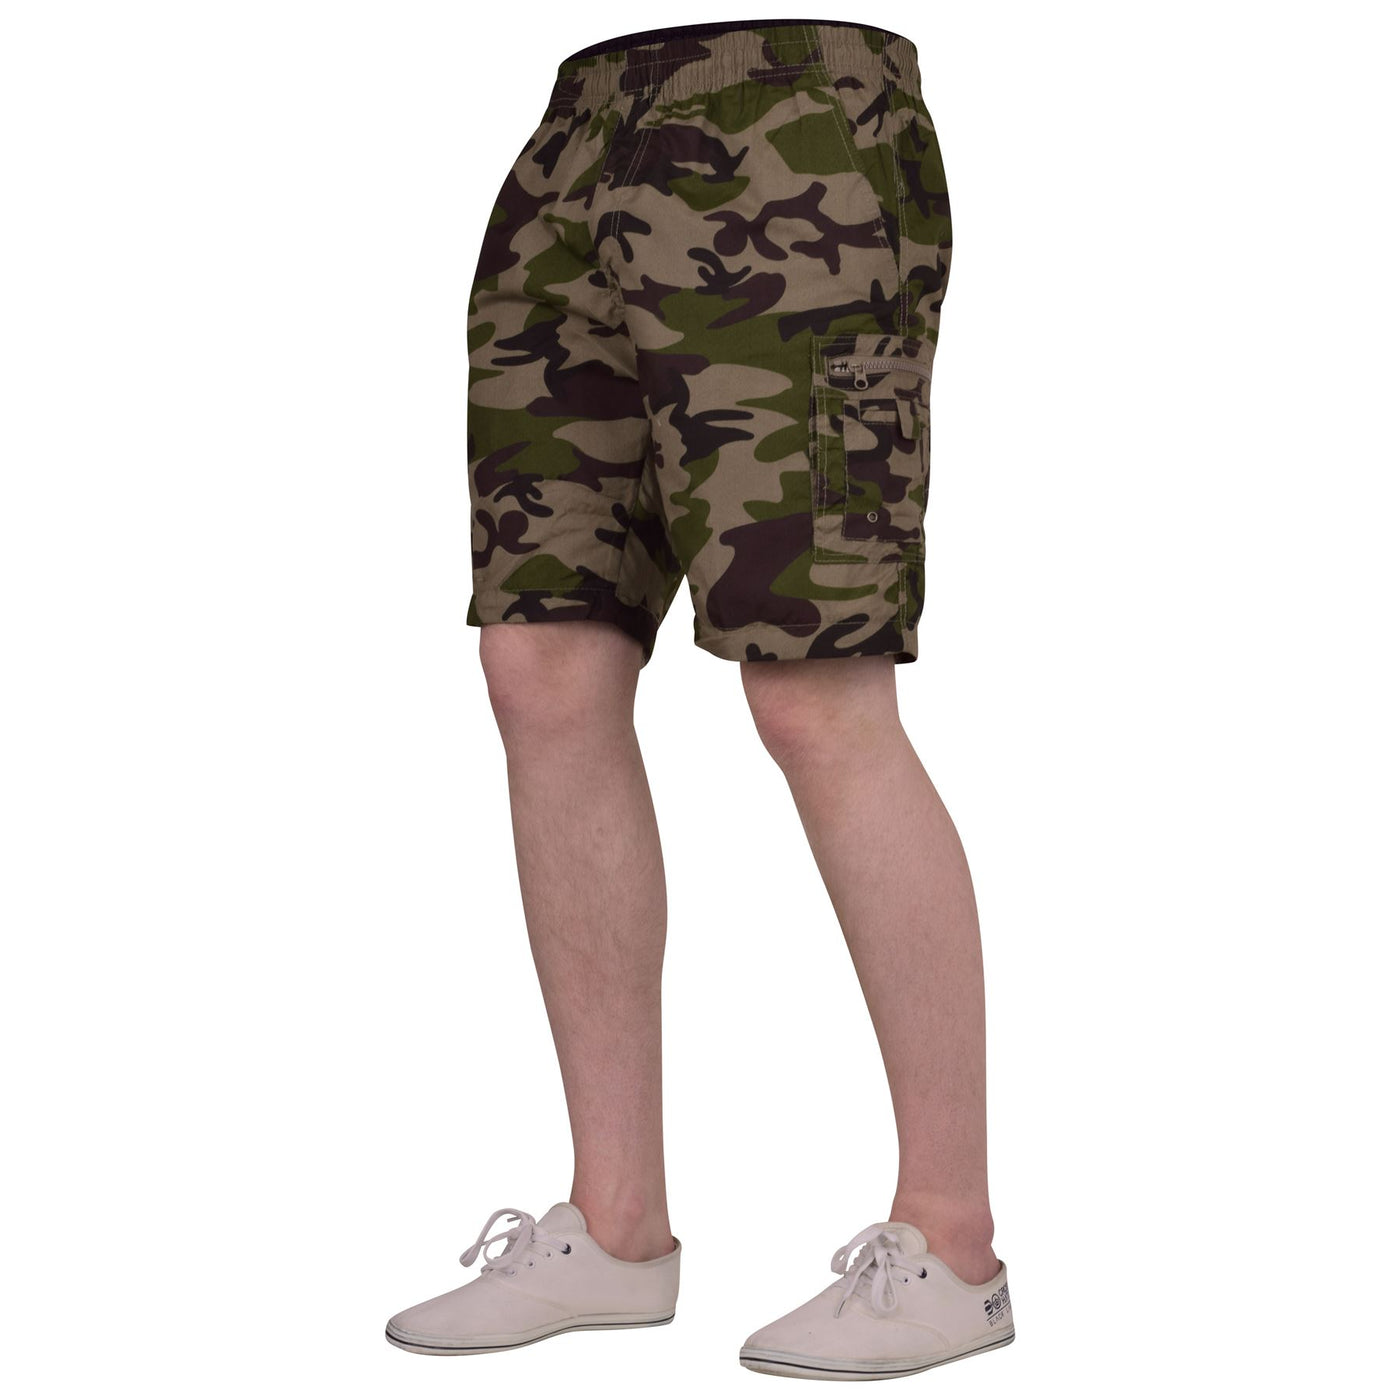 52_DNM Mens Combat Camouflage Cargo Loose Fitting Elastic Waist Pants | Military Tactical Trousers Zip Off Shorts Zip-Off 3/4's with Zipped Pockets and Adjustable Hem